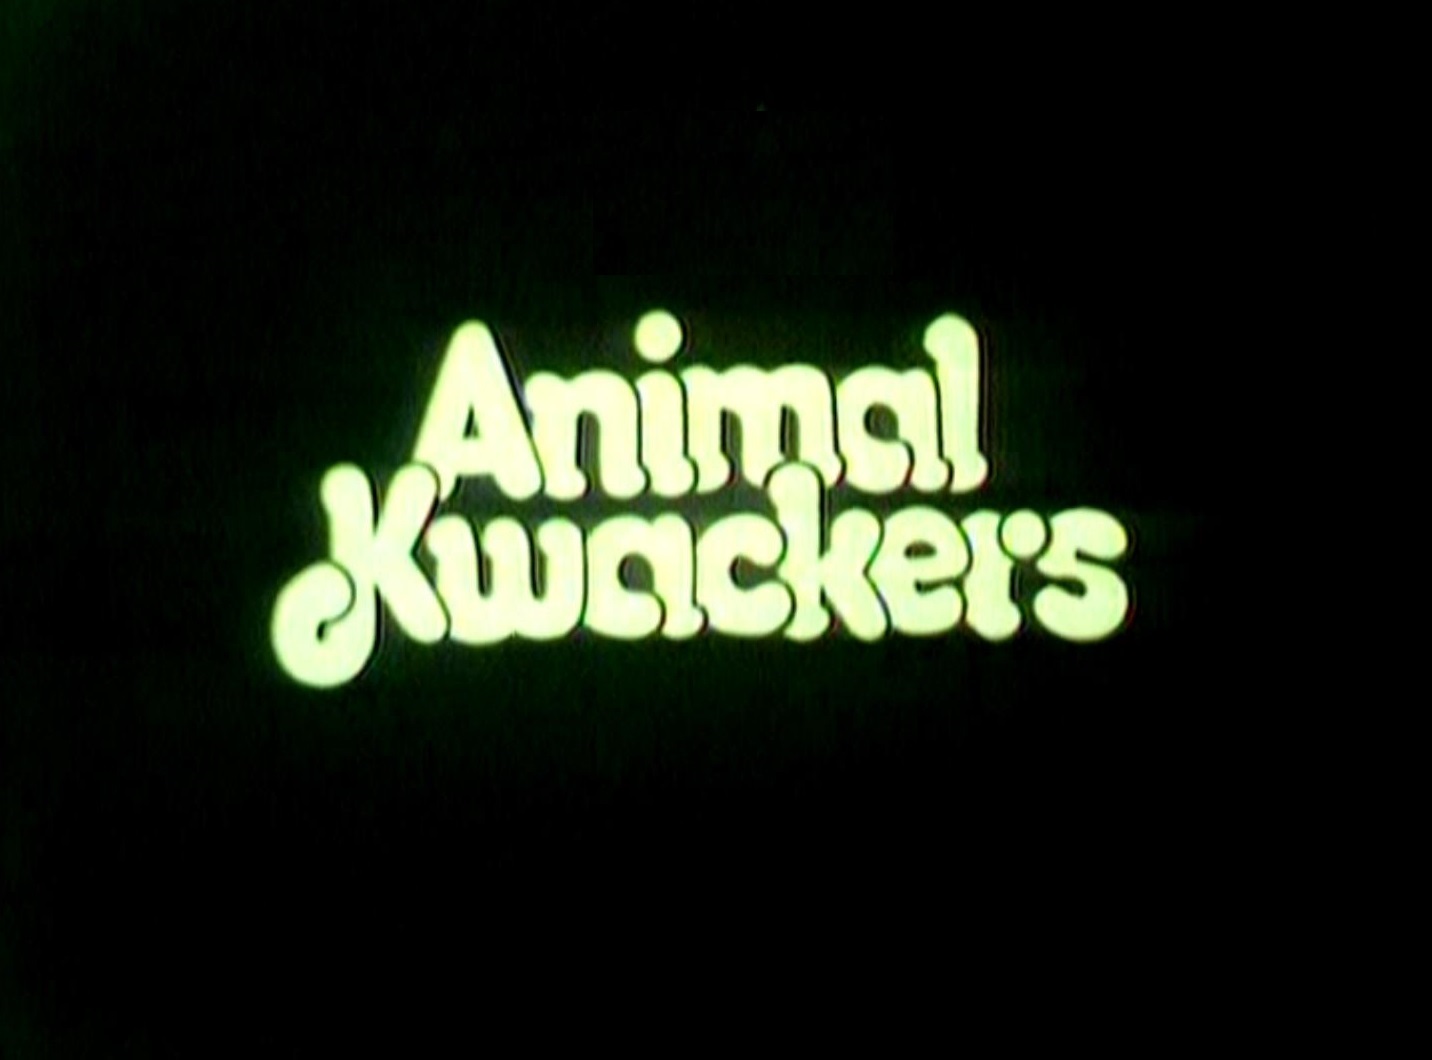 Titles to Animal Kwackers from the 11th November 1976